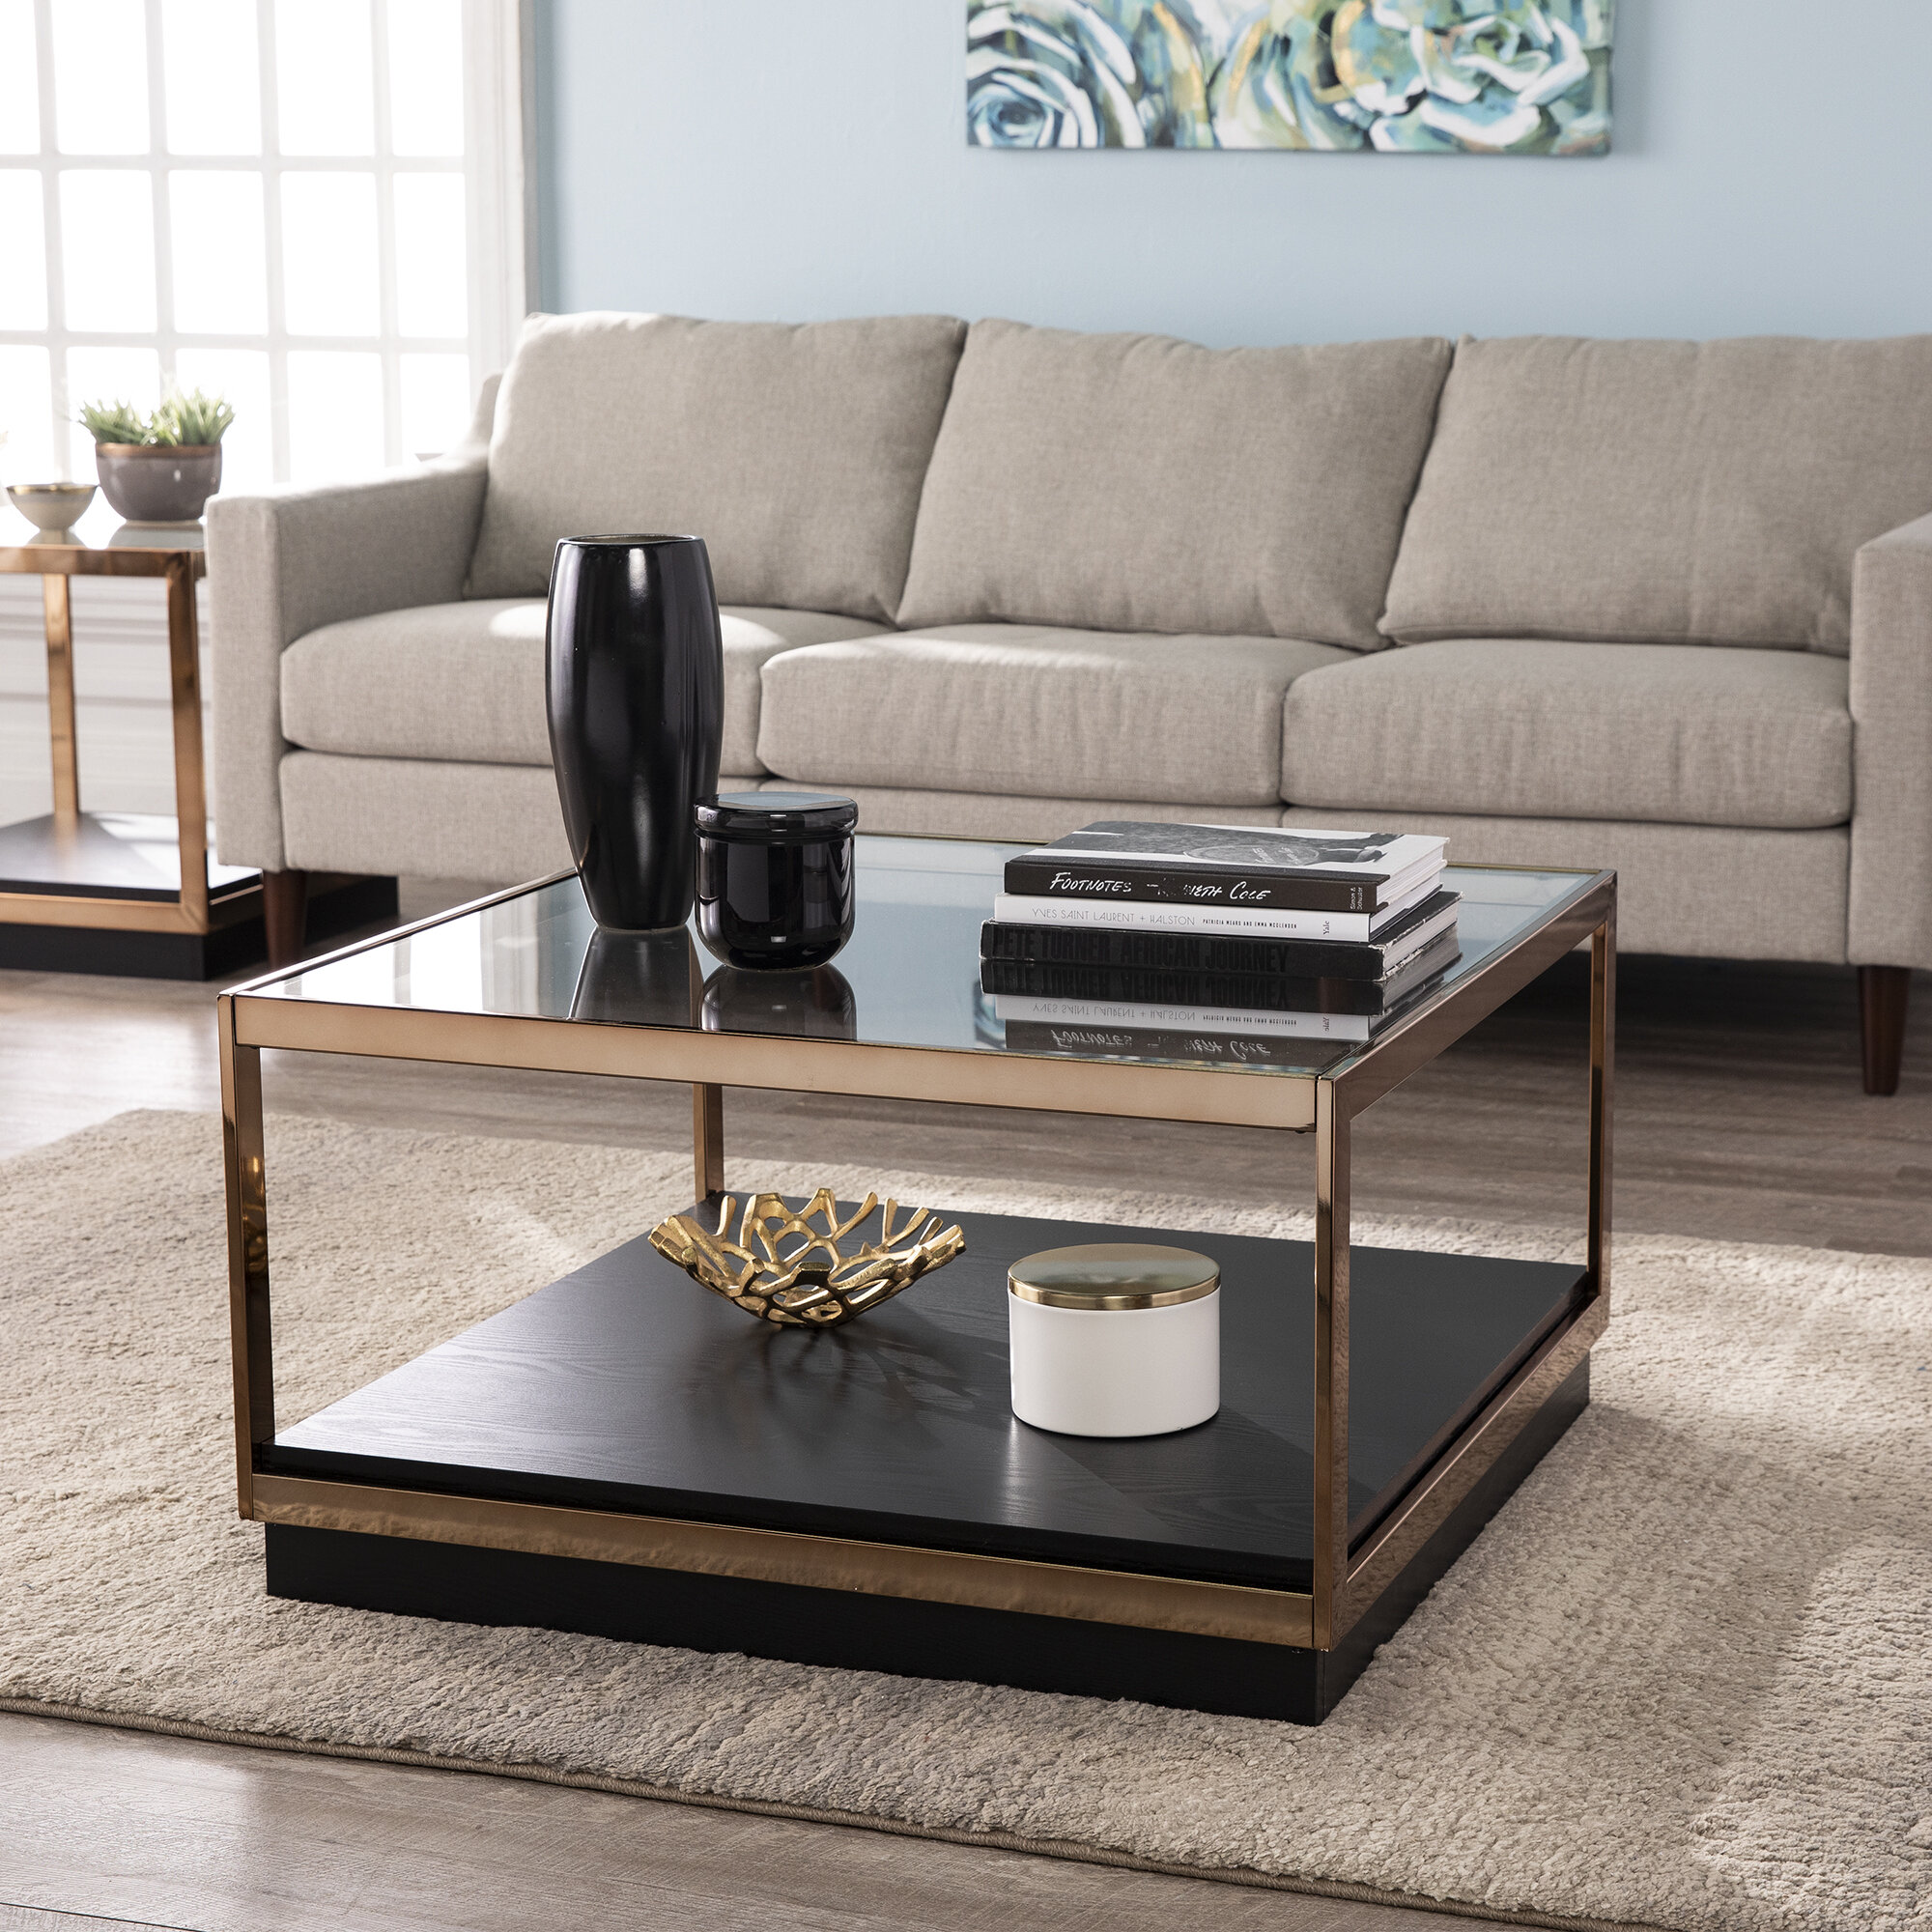 Coni Frame Coffee Table with Storage